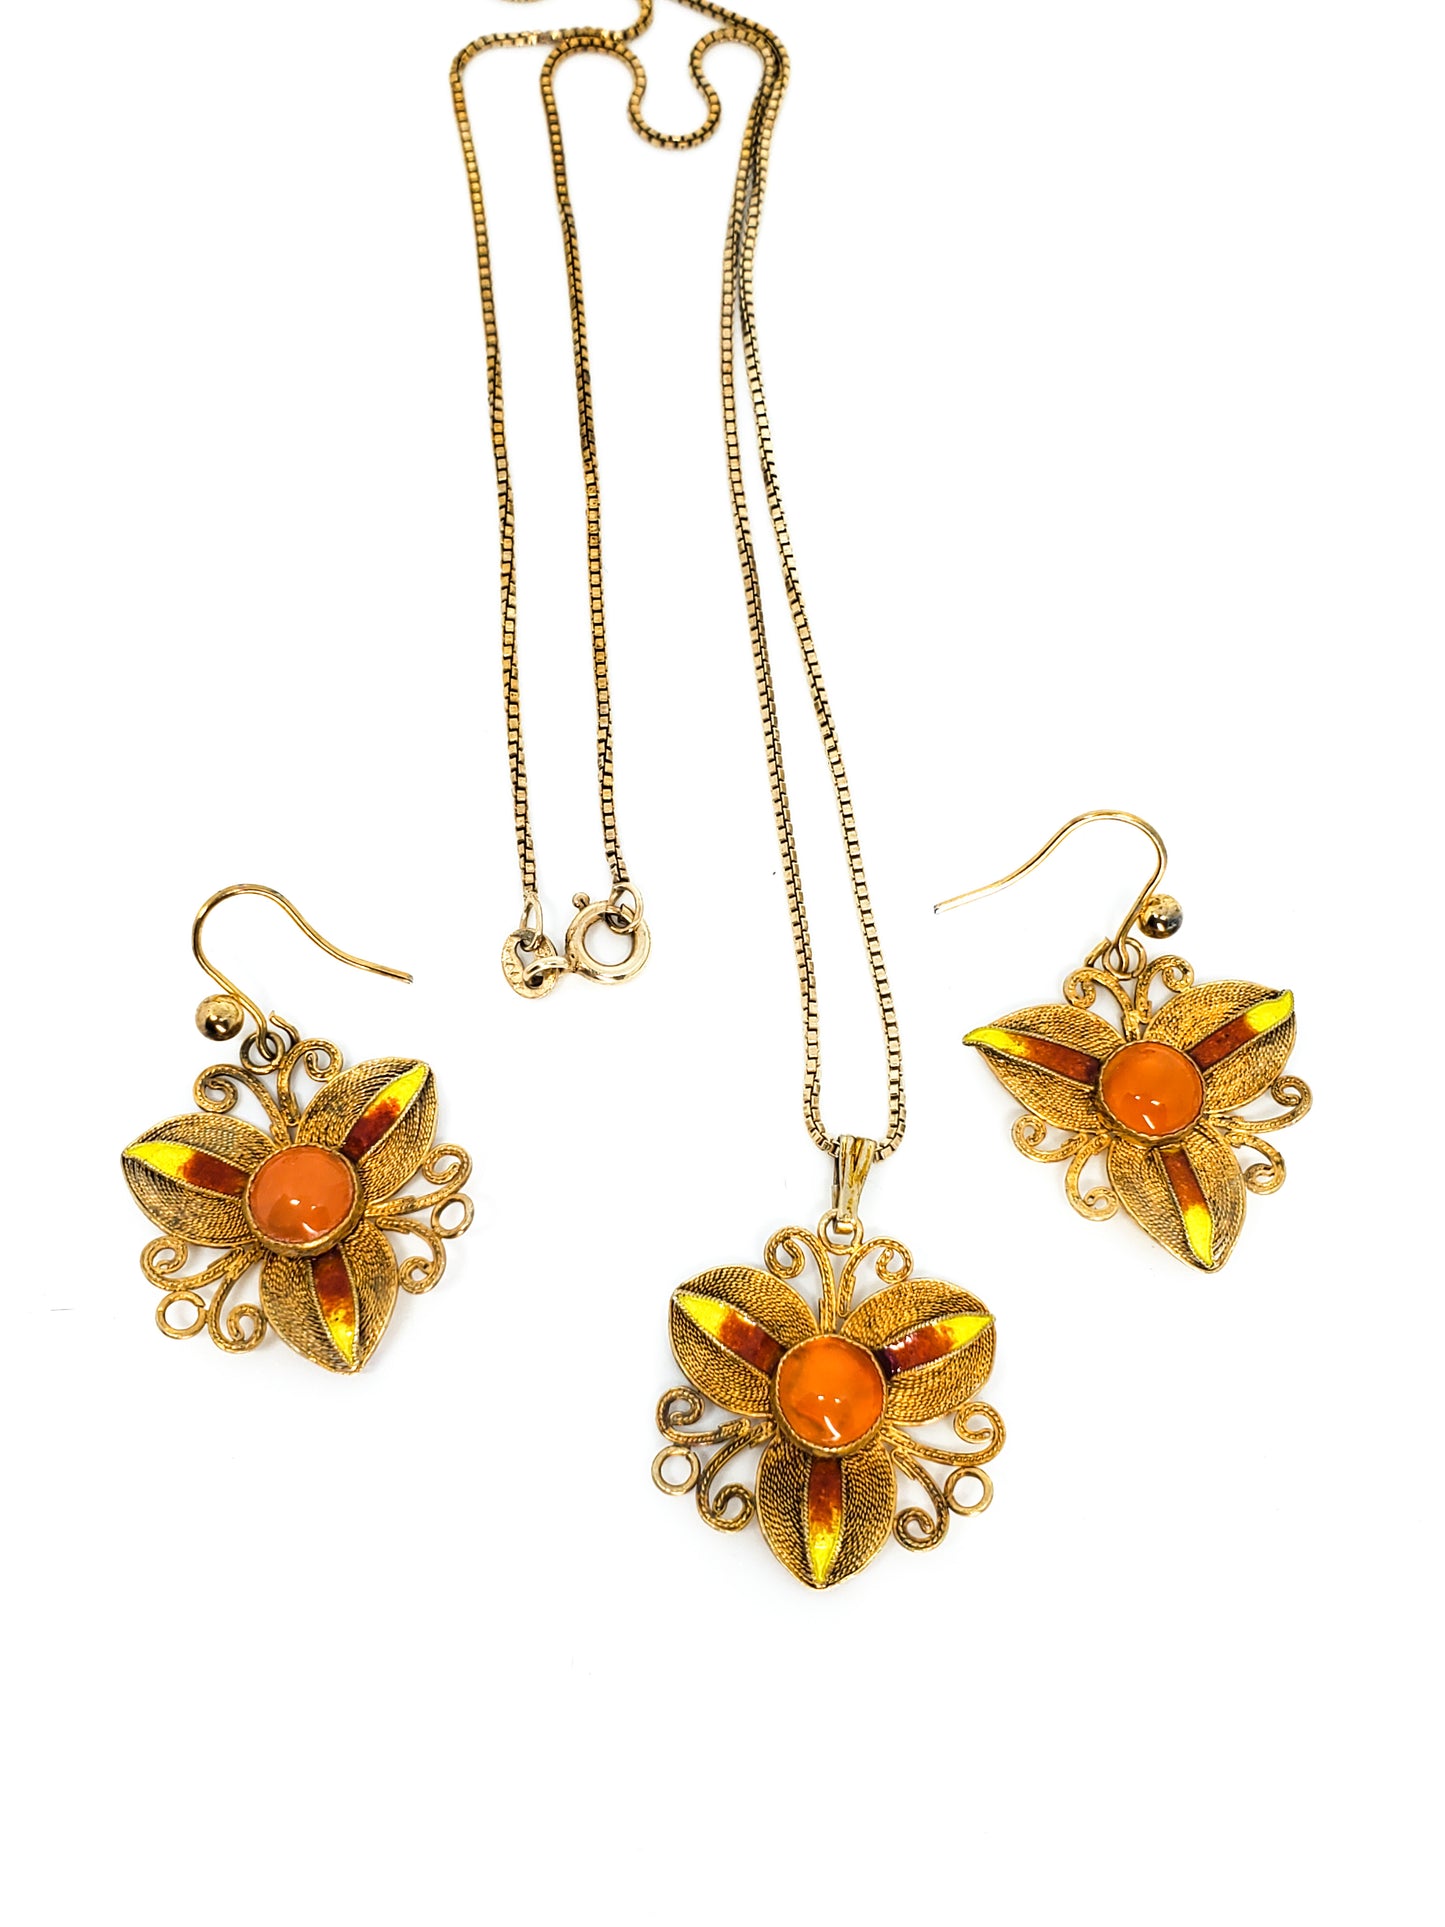 Chinese Export orange enamel vermeil gold over sterling necklace and earrings set 925